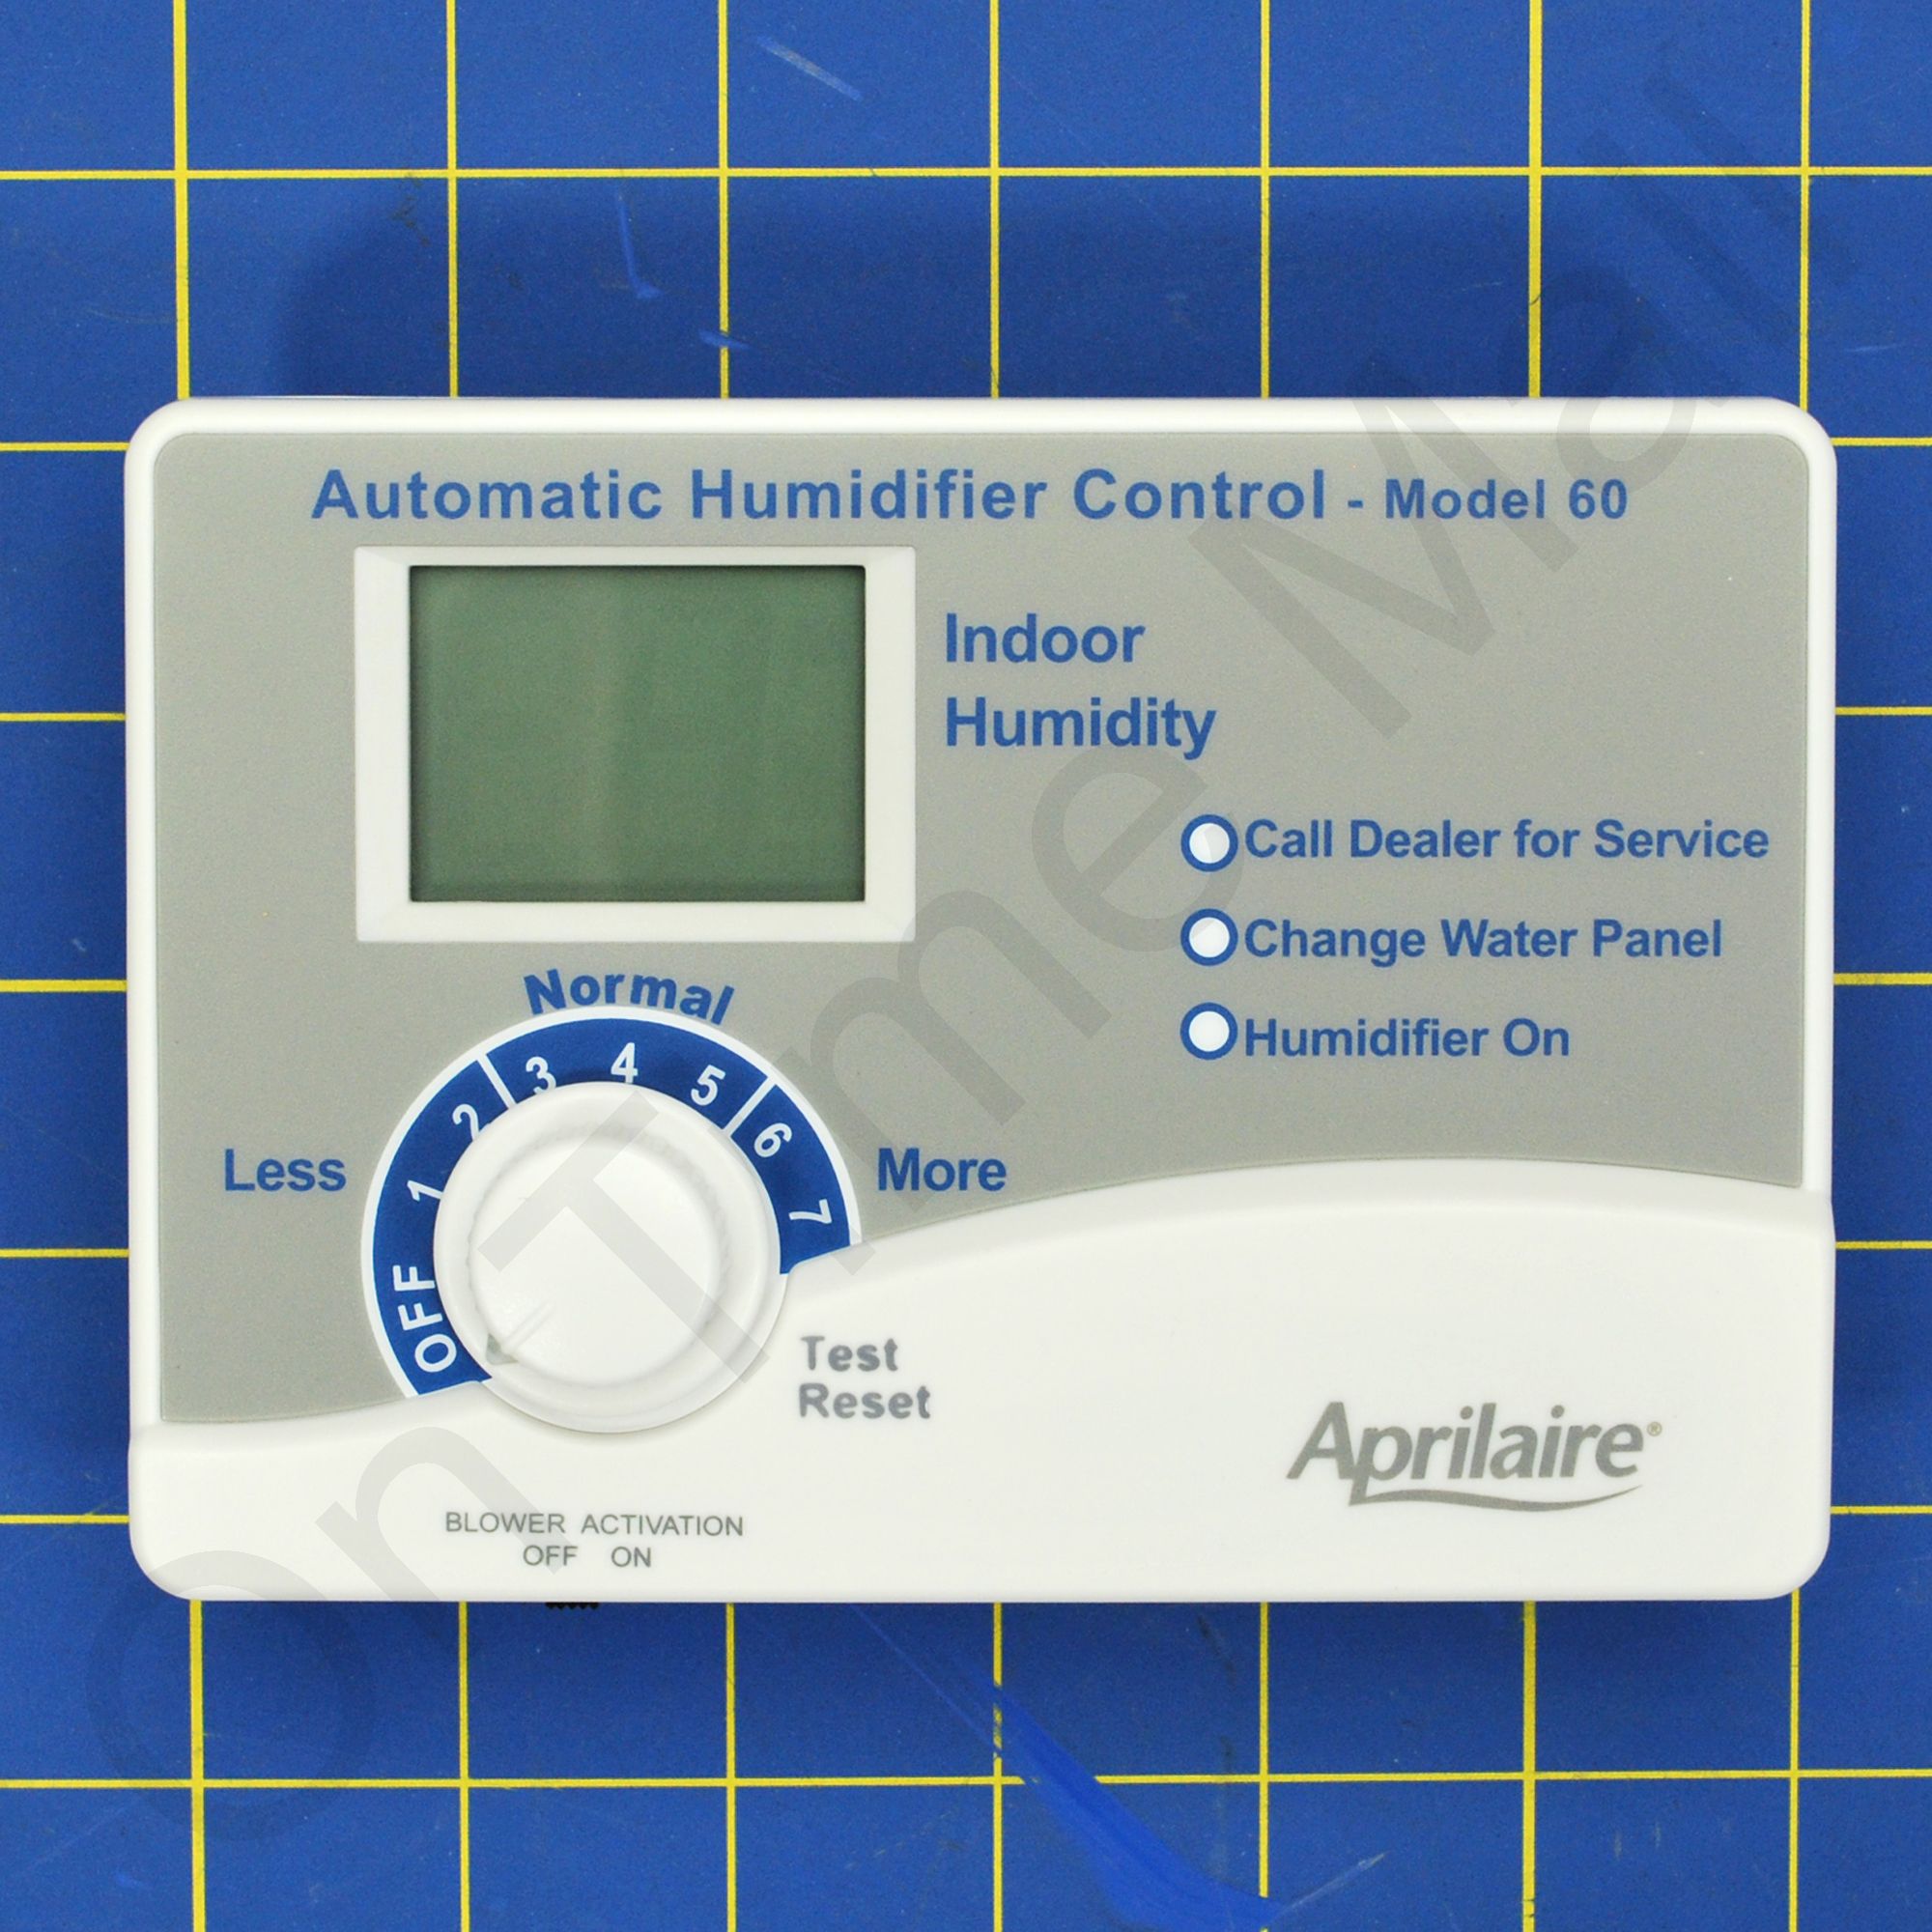 New Model 56 Aprilaire OEM Humidistat Automatic Humidifier Control - Free  S&H!